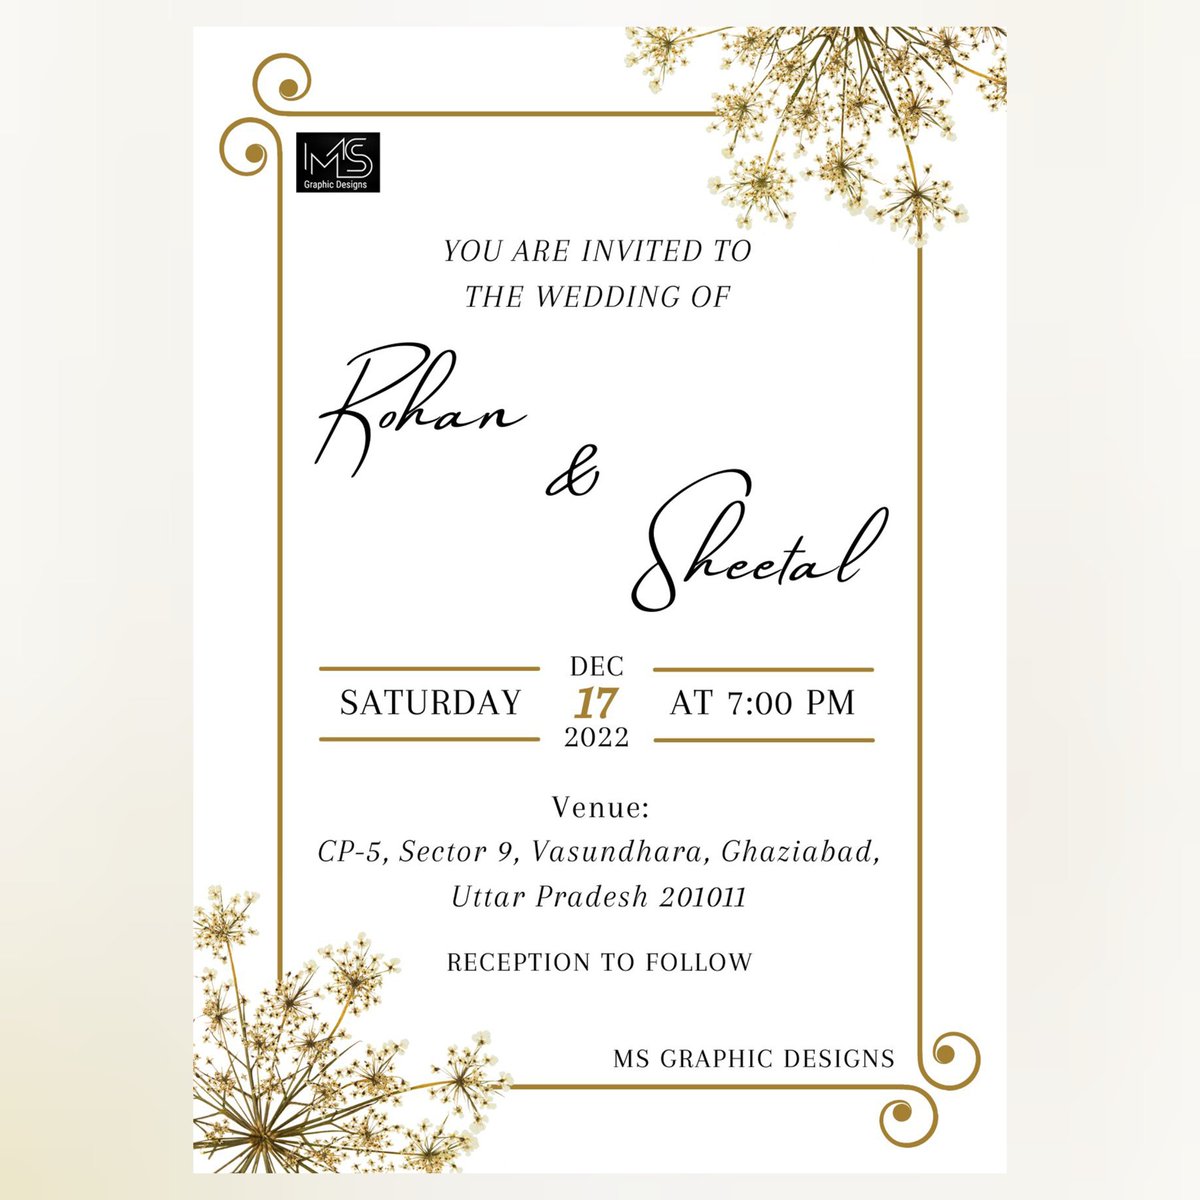 Wedding Invitation of Rohan x Sheetal🥀💫

Need graphic design services ..!! Dm me
I would like to see your designs.
Tag me @ms_graphic_designs_

#graphicdesign #weddingedits #weddingdesign #einvitation #invitation